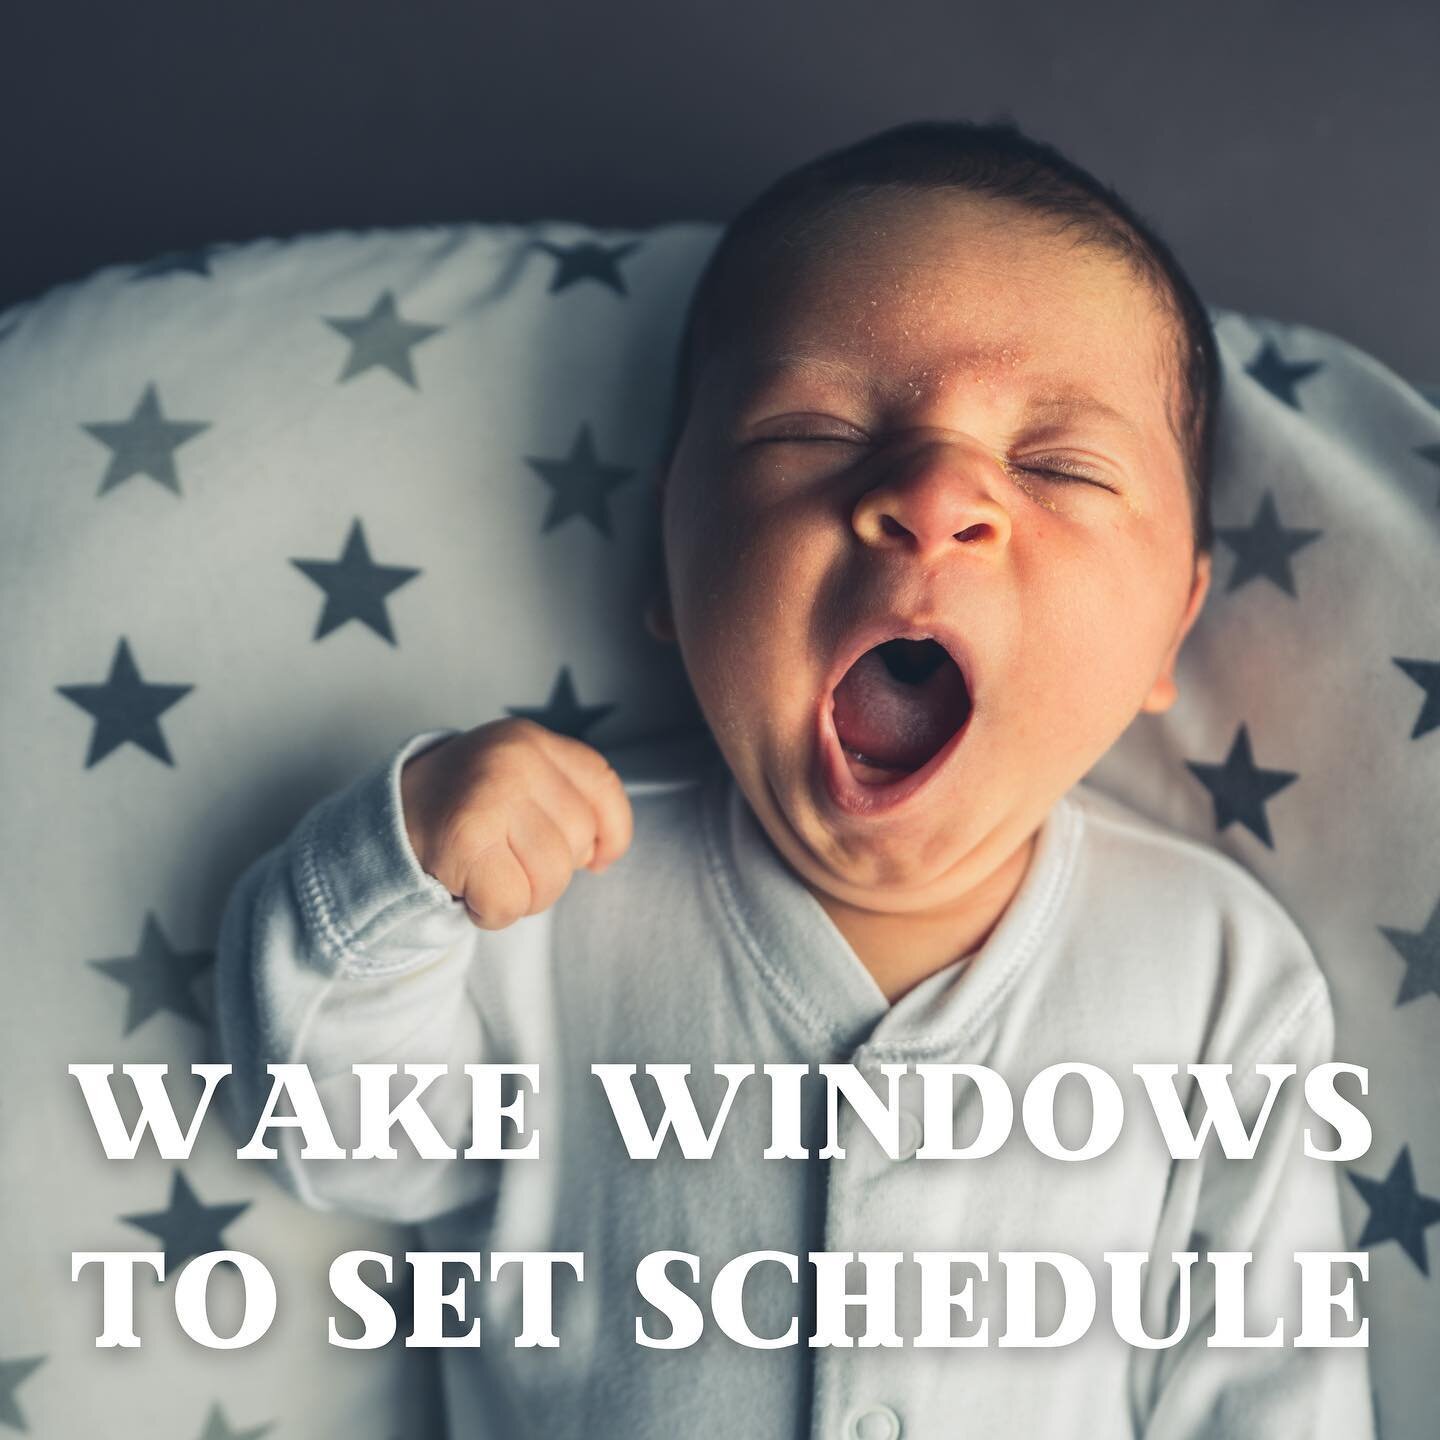 Moving from wake windows 👉🏼 set schedule:⠀
☁️ Most babies can handle a nap at the same time each day by the time they are solidly on 2 naps⠀
☁️ This typically happens around 7 months 
☁️ A set schedule can help with having more predictability in th